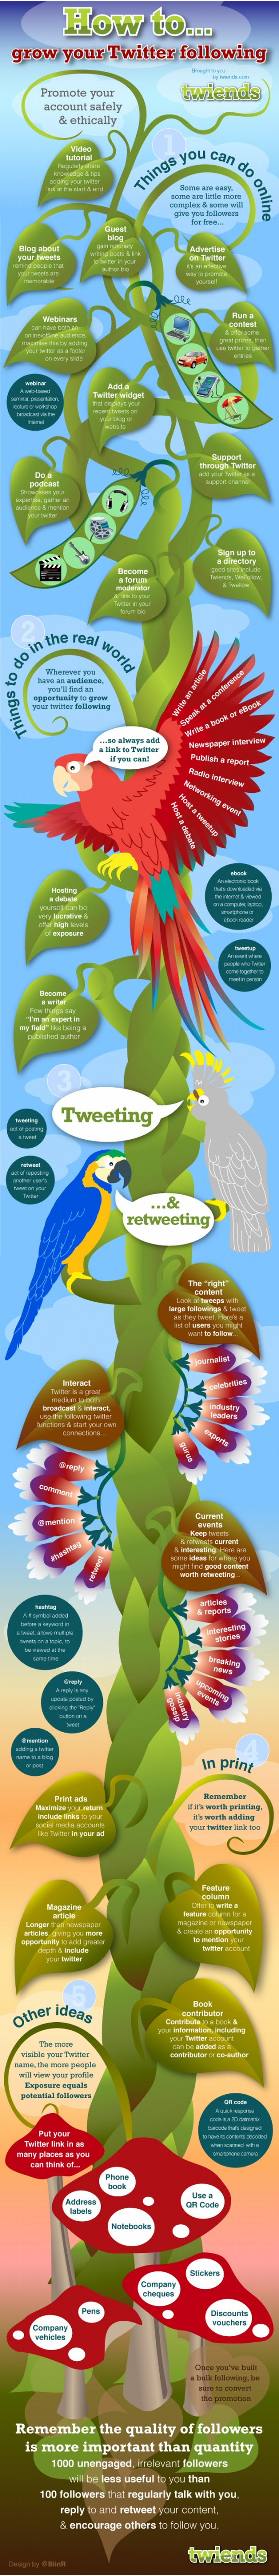 Grow your Twitter followers with this blog